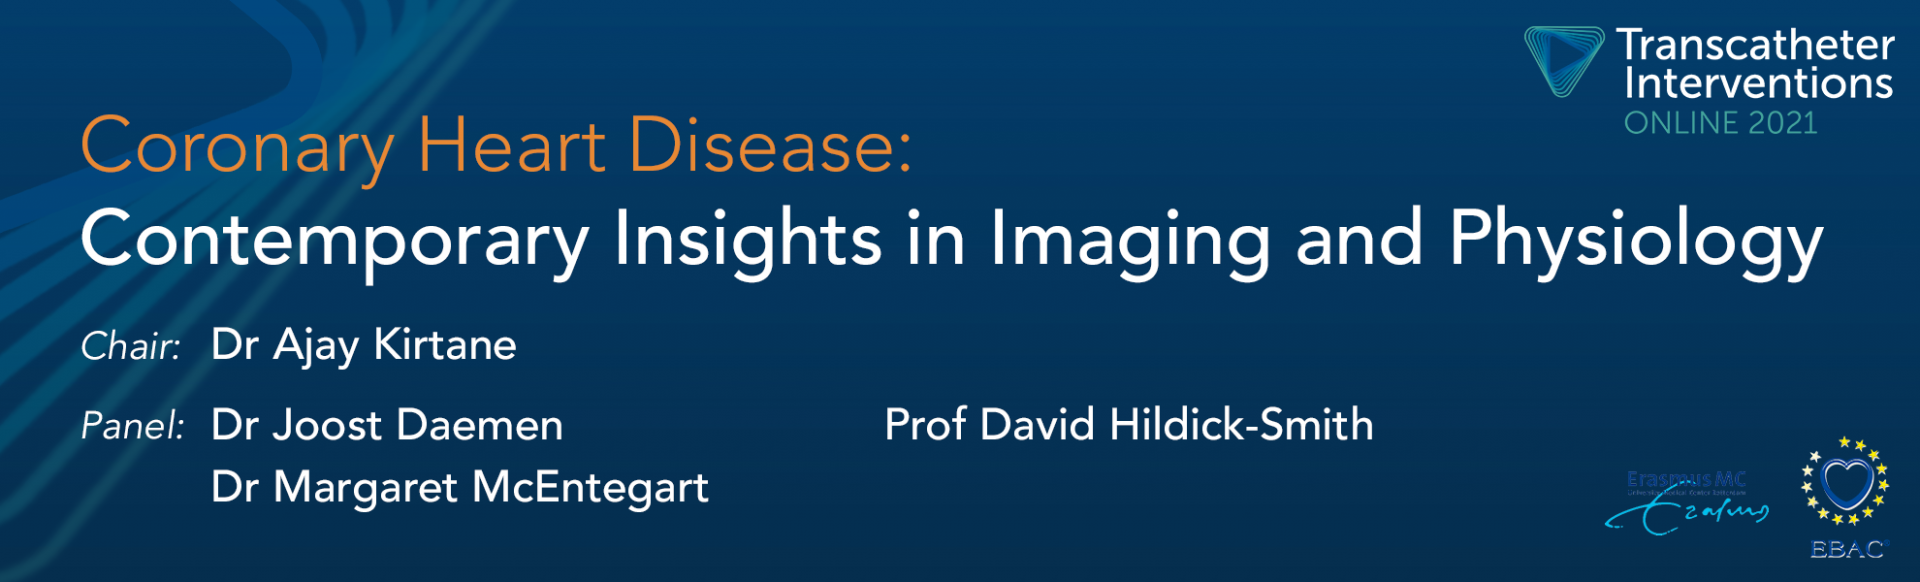 Contemporary Insights in Imaging and Physiology